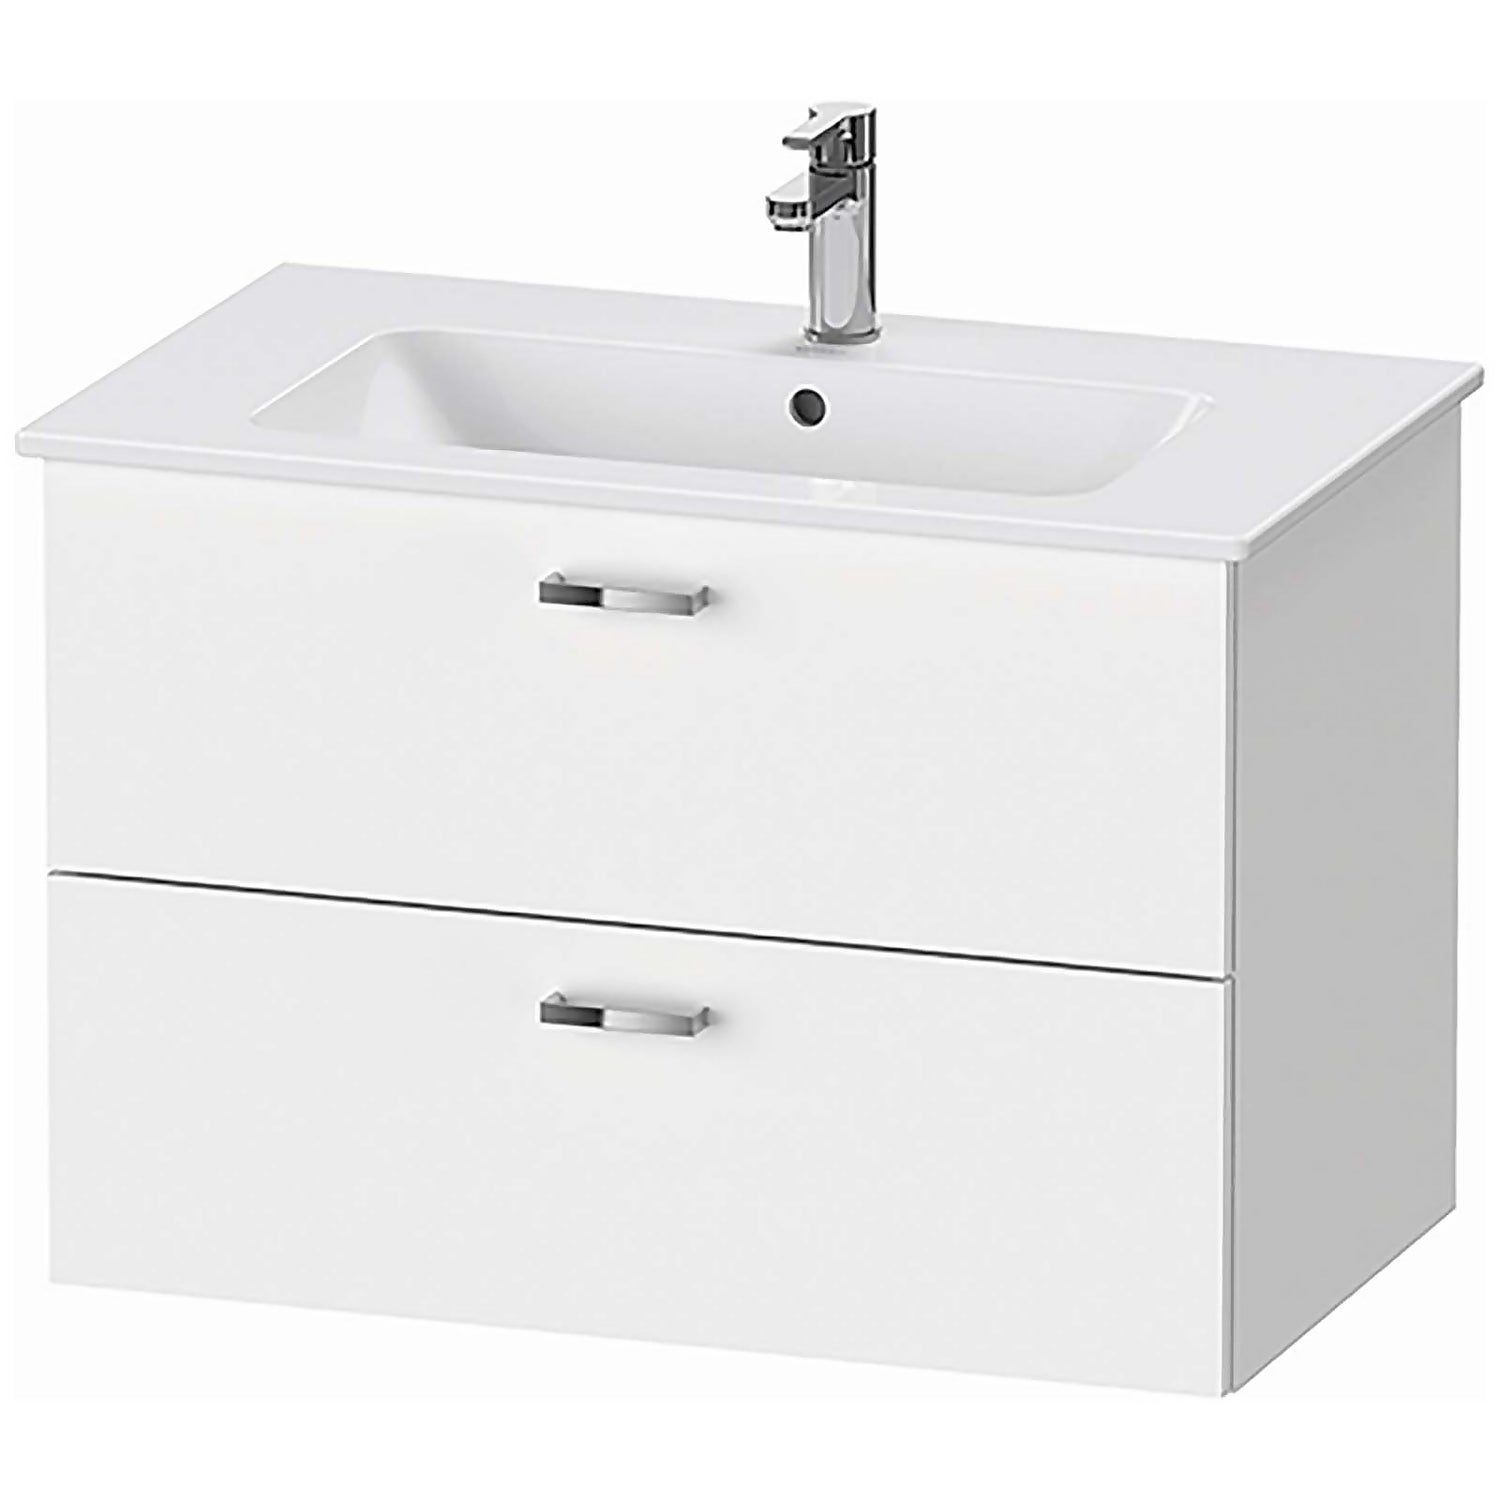 Duravit Xbase 800mm Wall Hung Vanity Unit with Basin - White